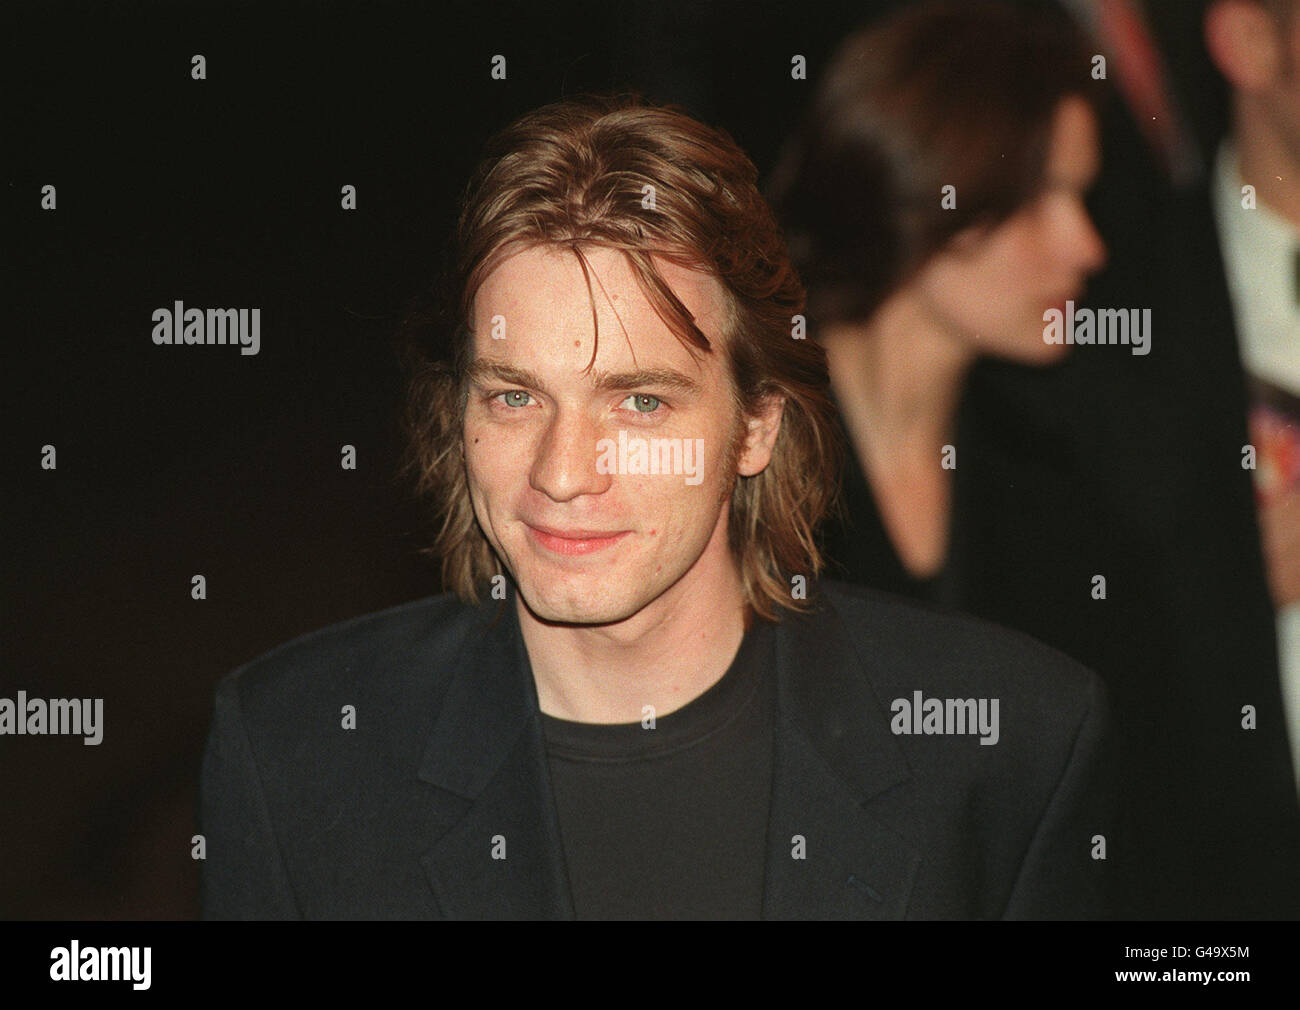 ACTOR EWAN MCGREGOR AT THE MOVIE PREMIERE OF THE SPECIAL EDITION VERSION OF  THE FILM "STAR WARS - EPISODE IV - A NEW HOPE" IN LONDON Stock Photo - Alamy